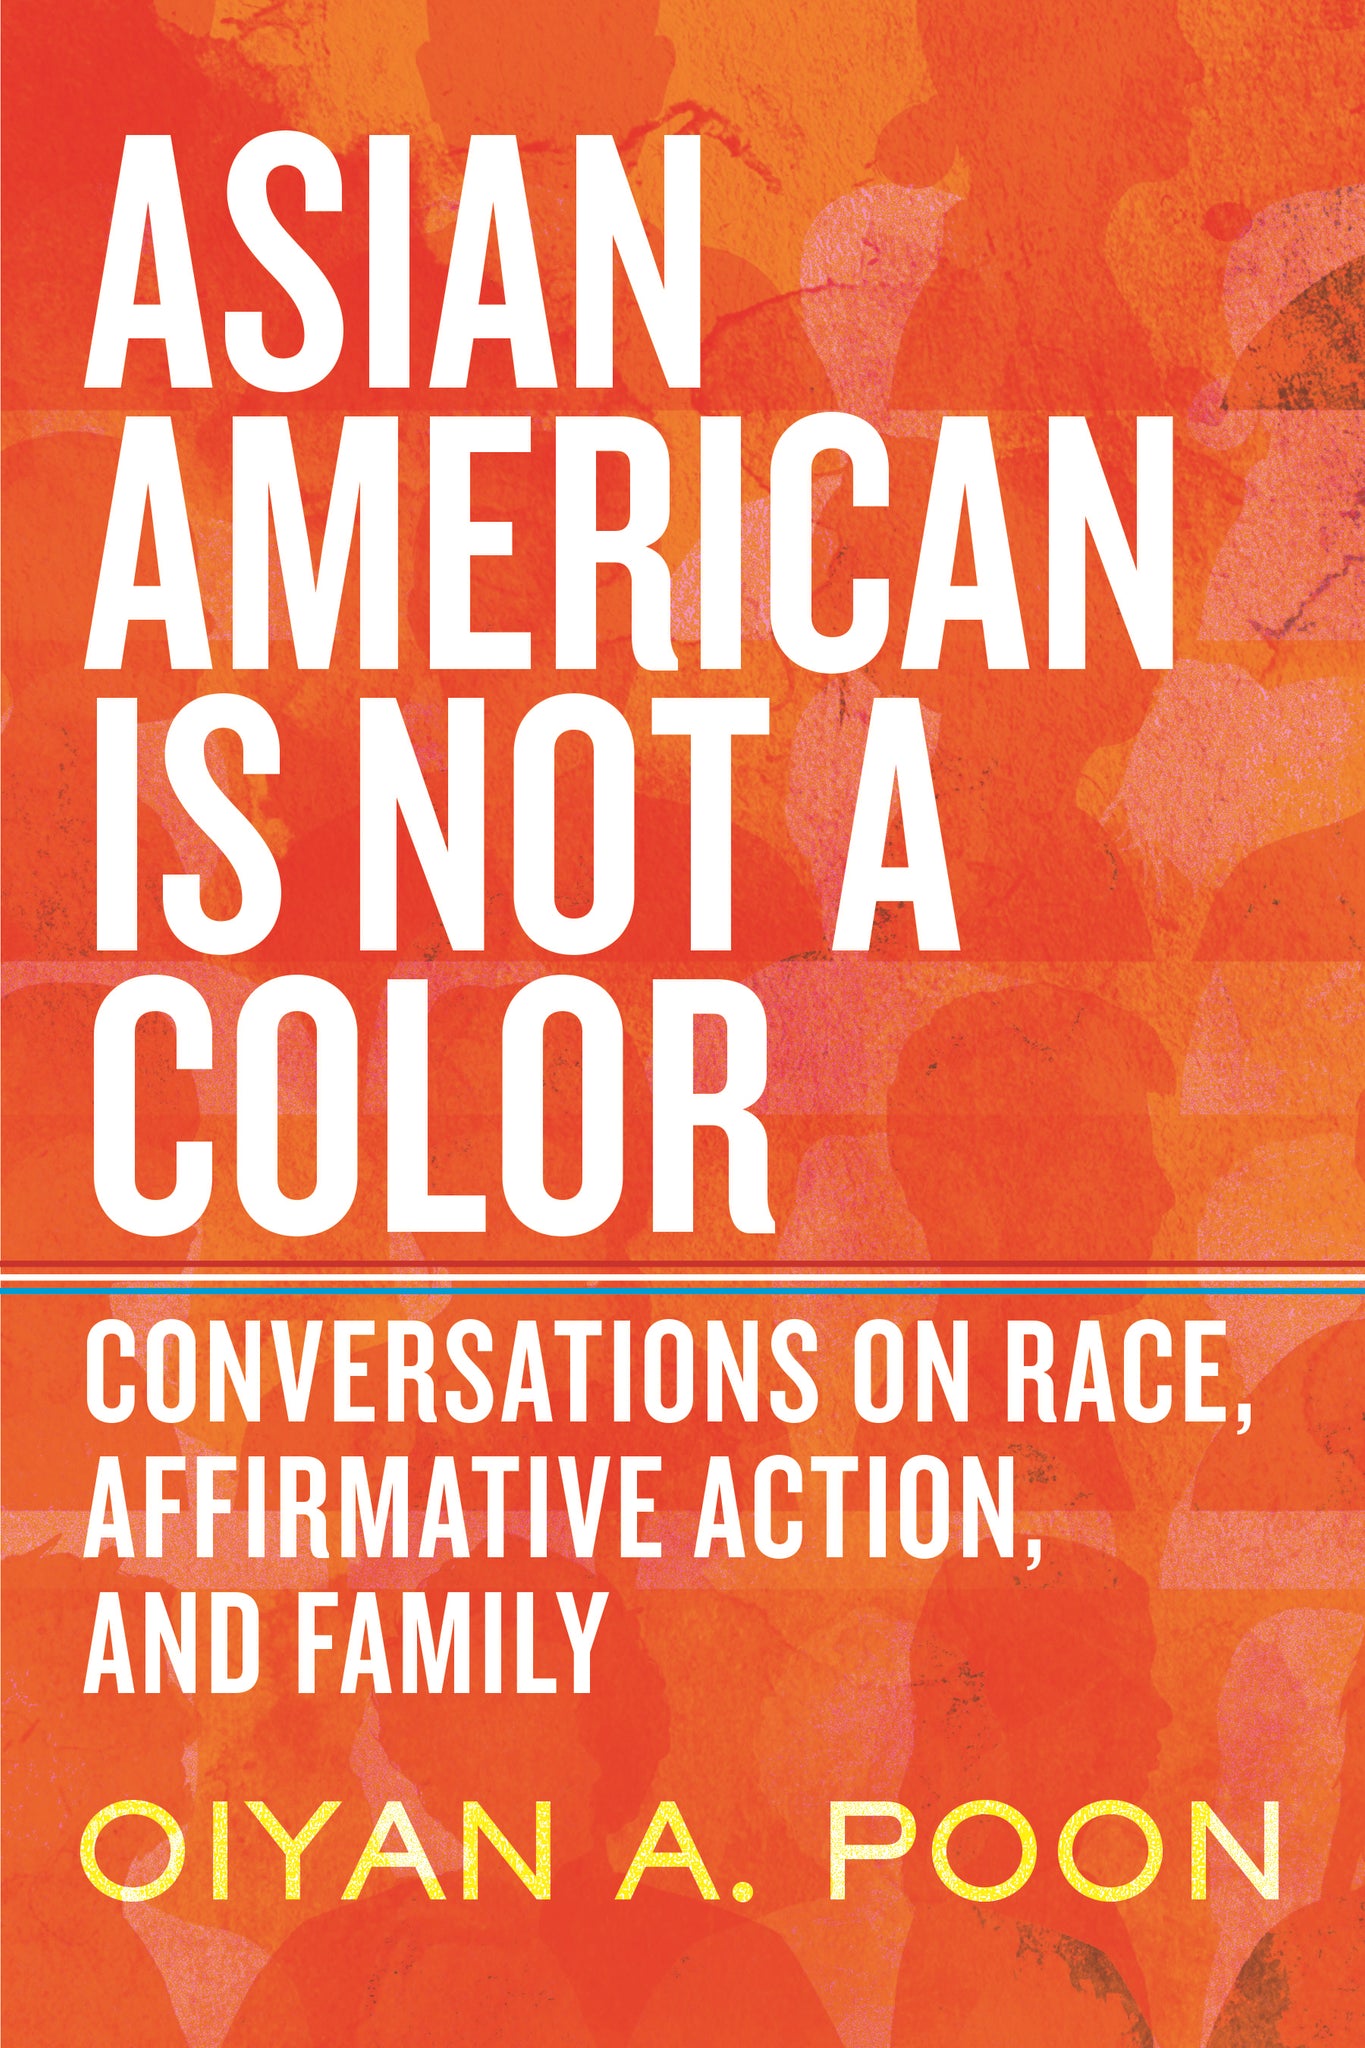 Asian American Is Not a Color: Conversations on Race, Affirmative Action, and Family (Hardcover)